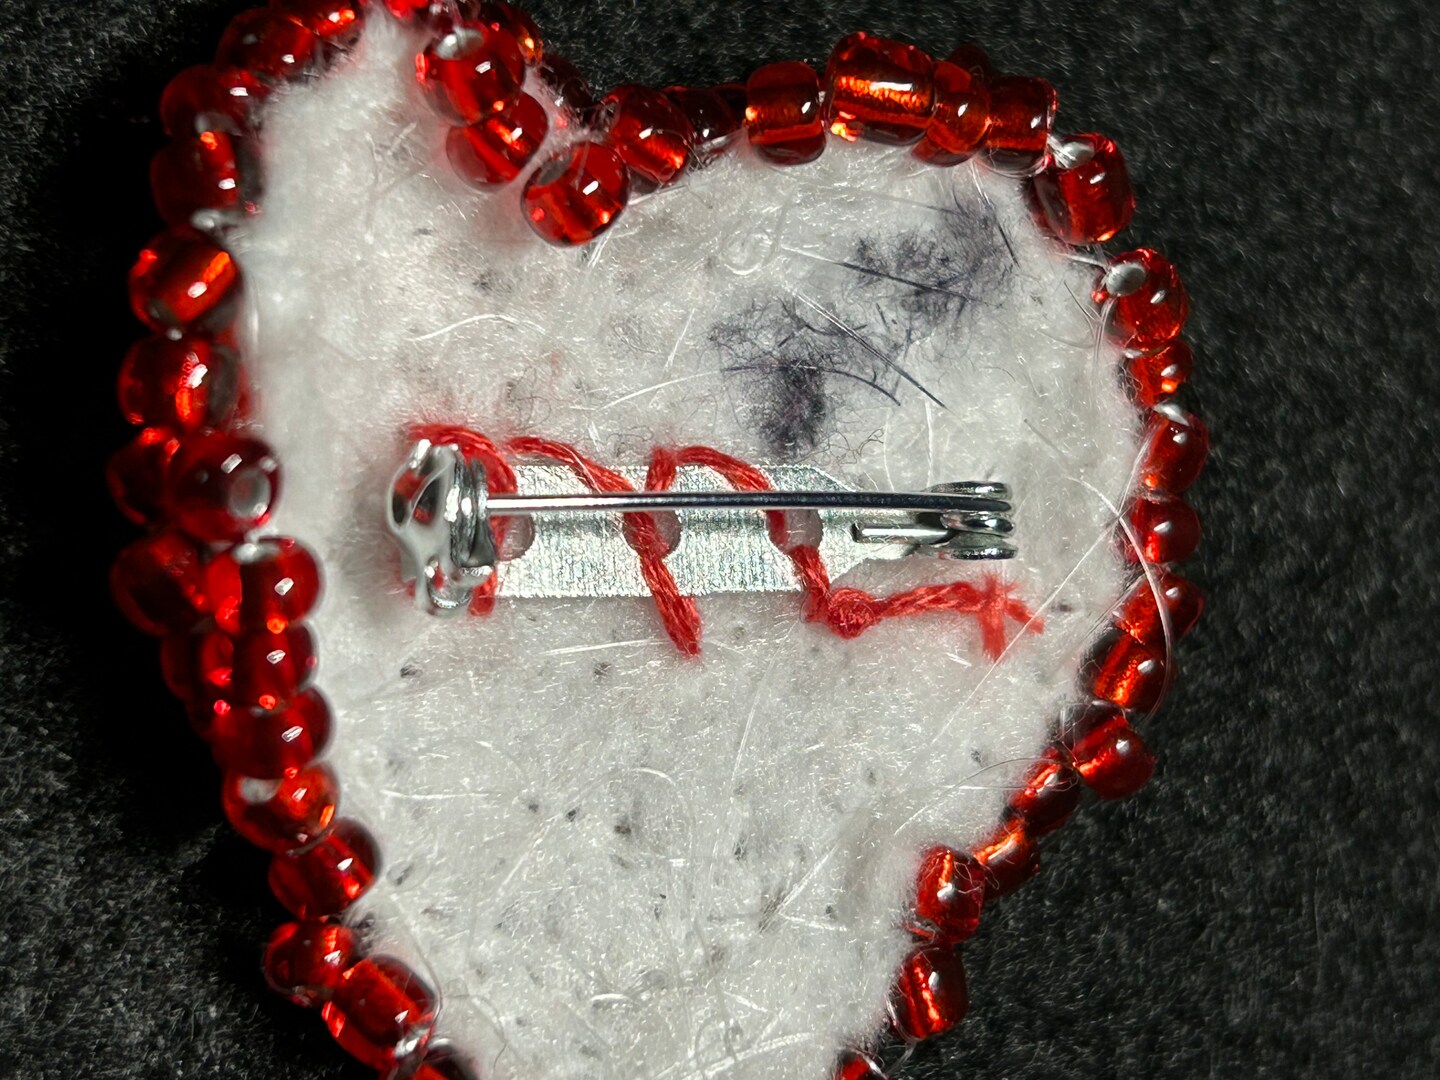 Heart Red Valentines Red Beads Stock Photo 1016940289